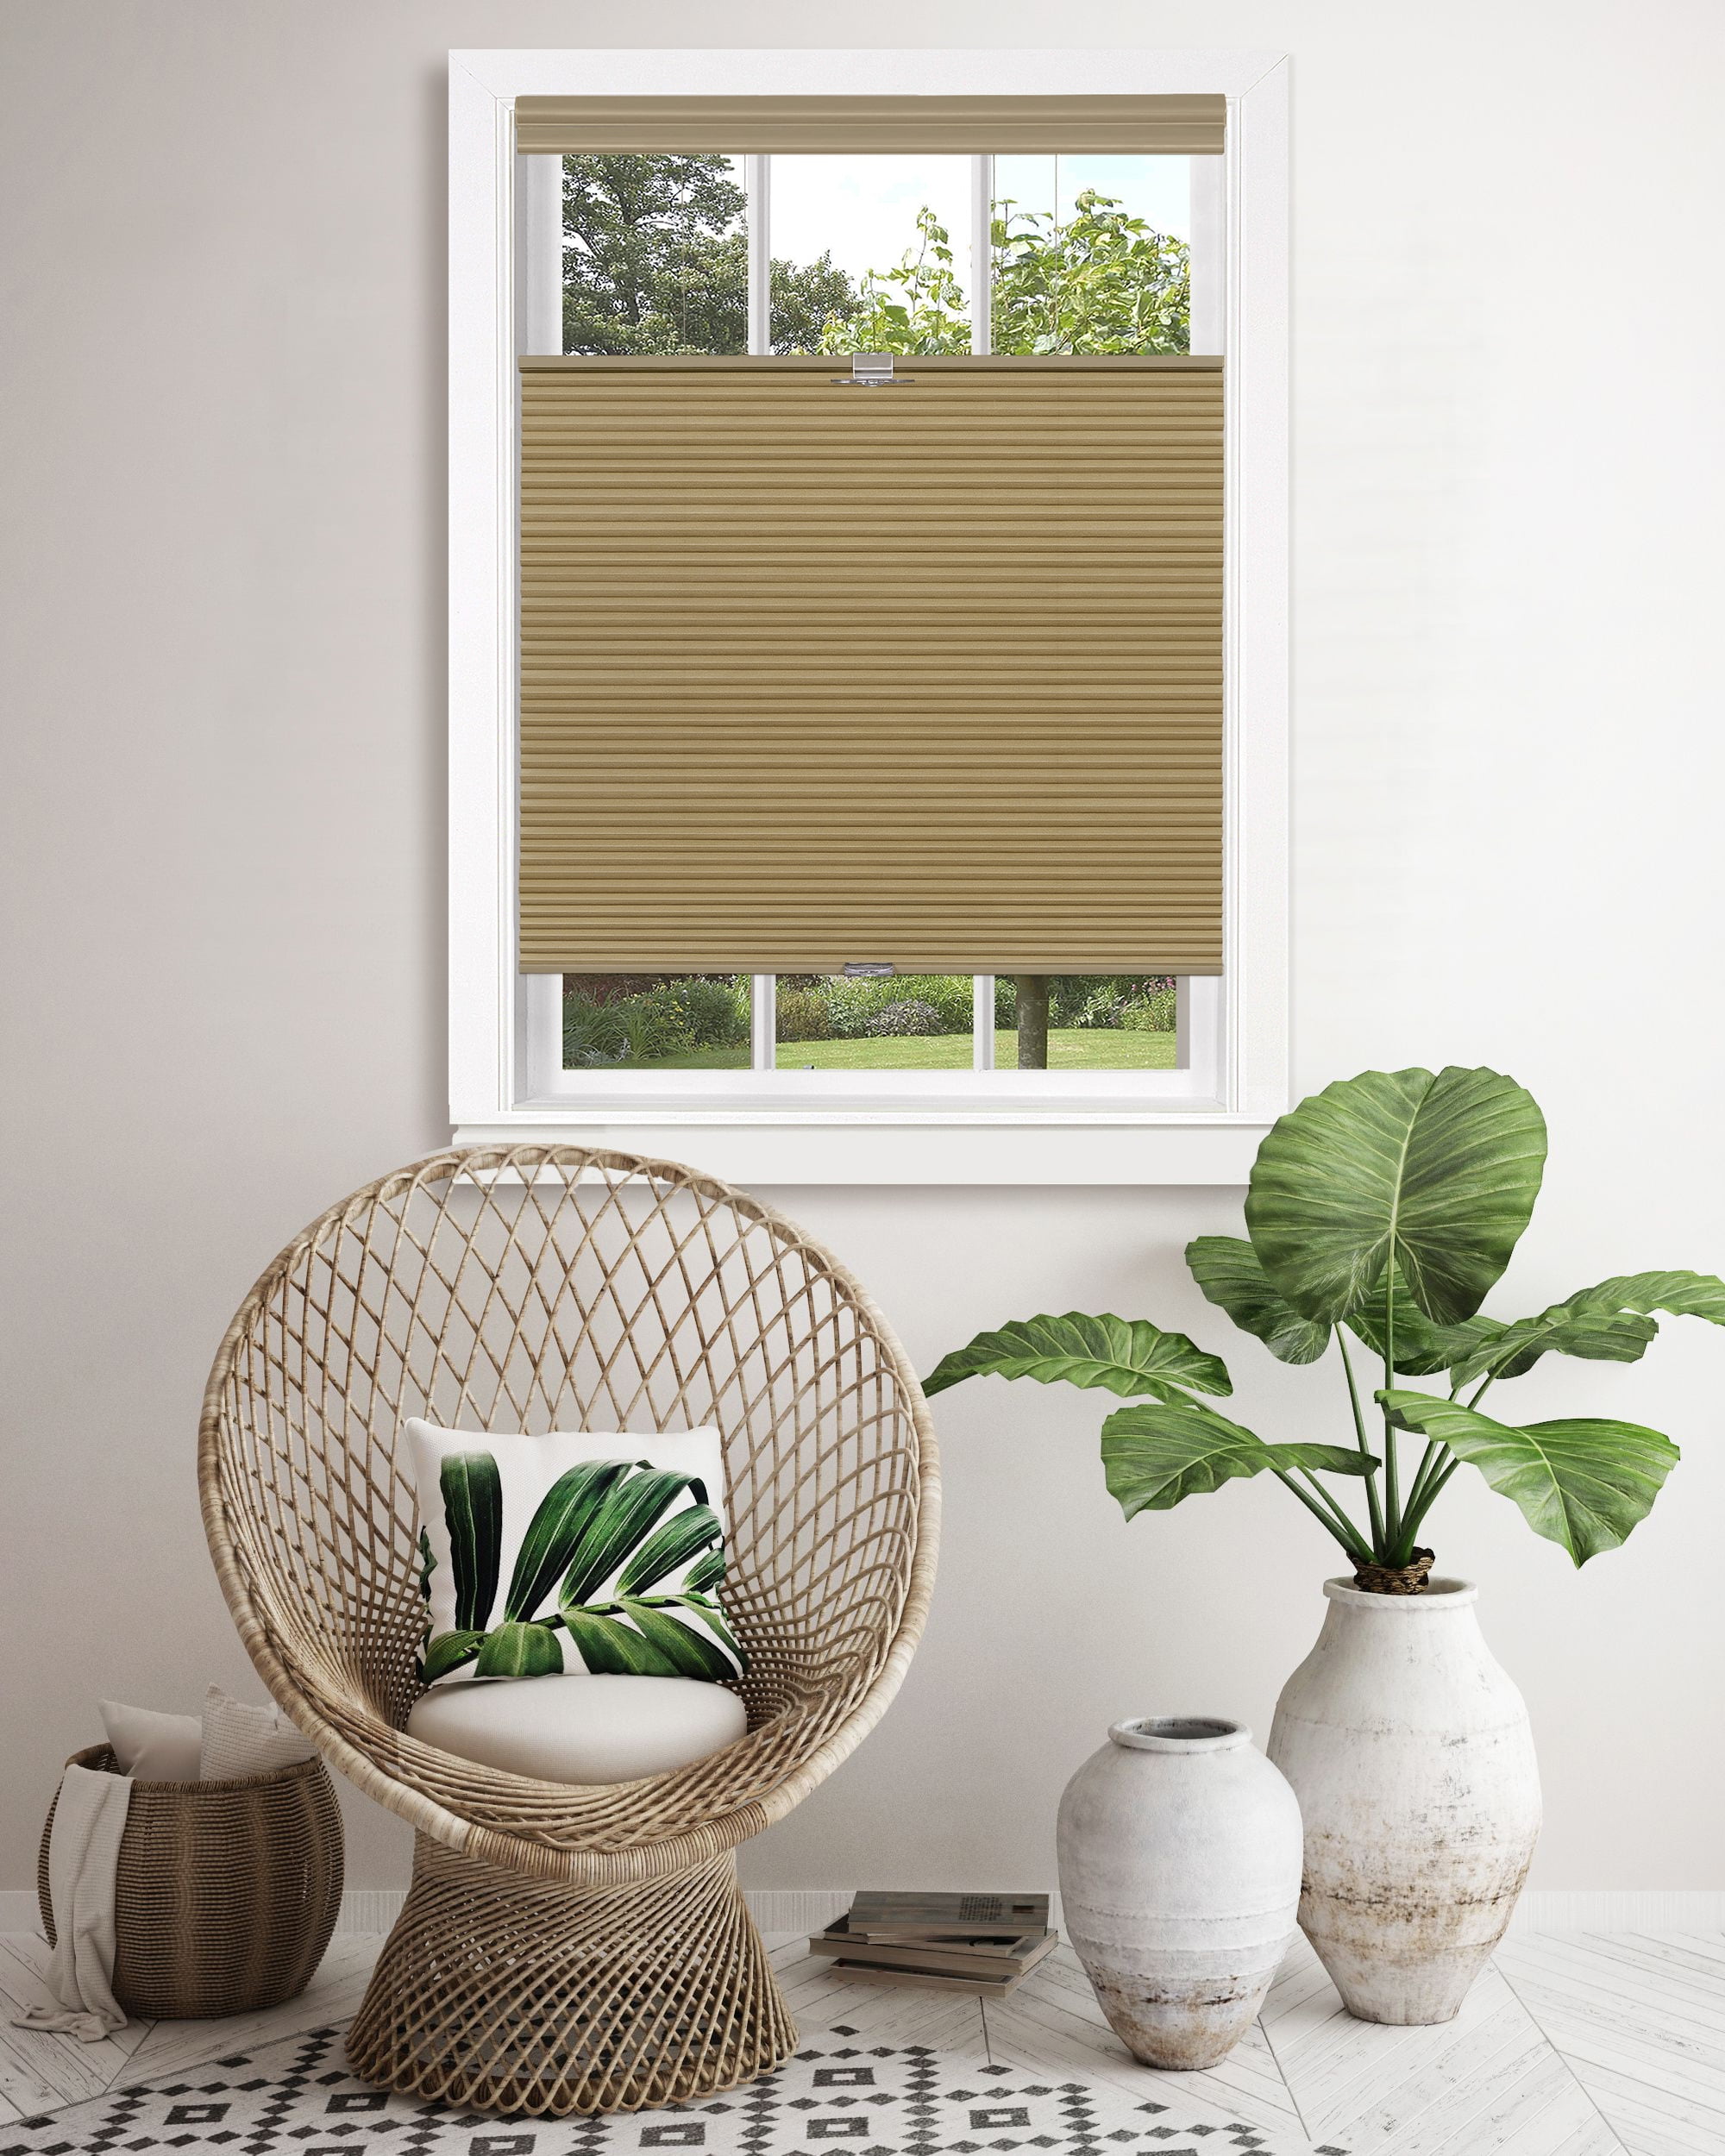 Biltek Privacy 34 W x 64 H Blinds Cellular Pleated Honeycomb Top-Down Cordless Shades